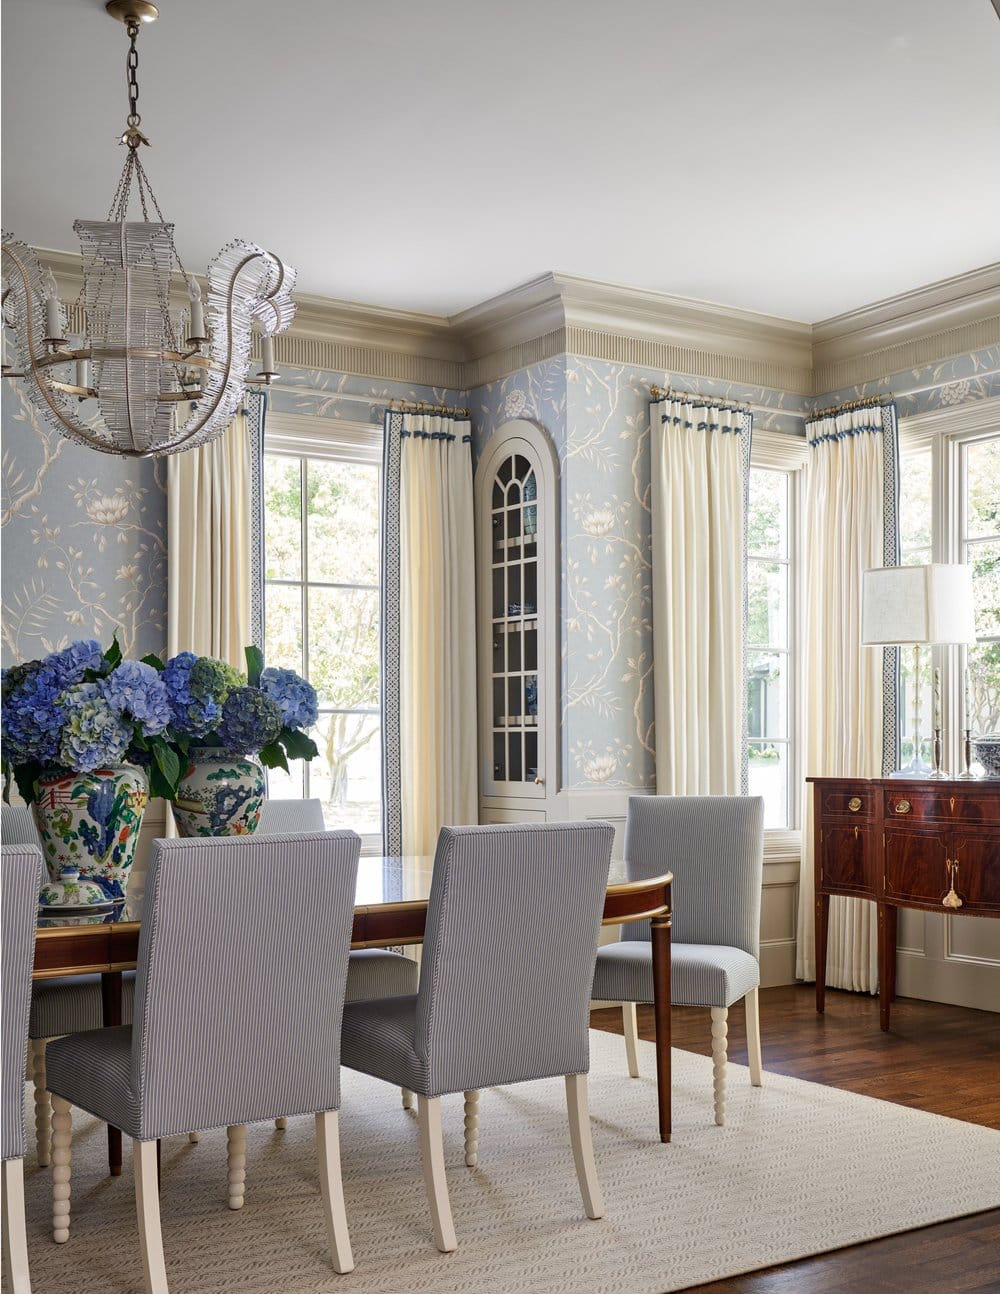 Jenkins interiors | Nathan Schroder Photography - dining room, dining room crystal chandelier, wallpaper